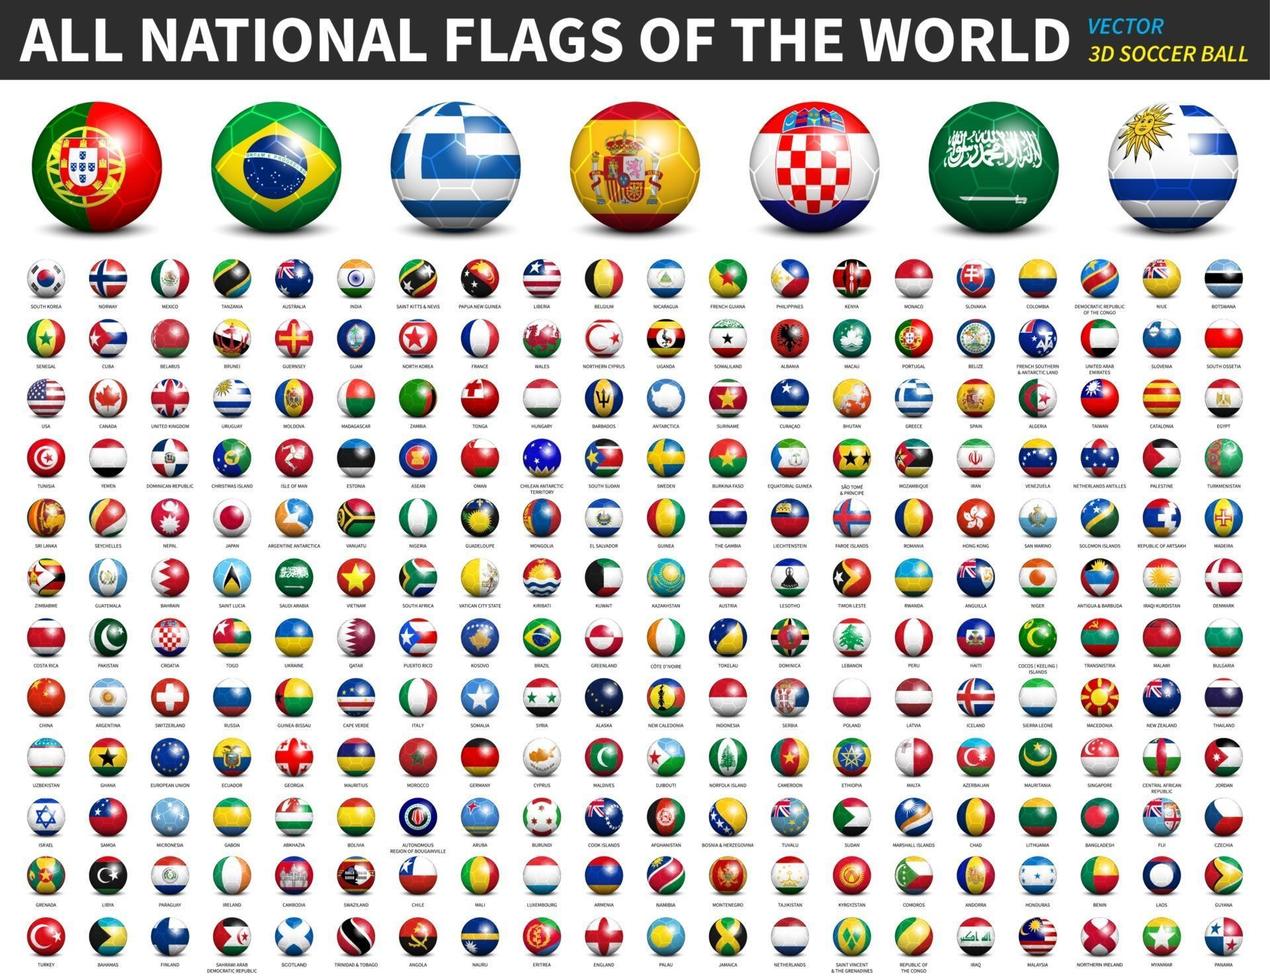 All national flags of the world . 3D Soccer ball or football design . Vector .